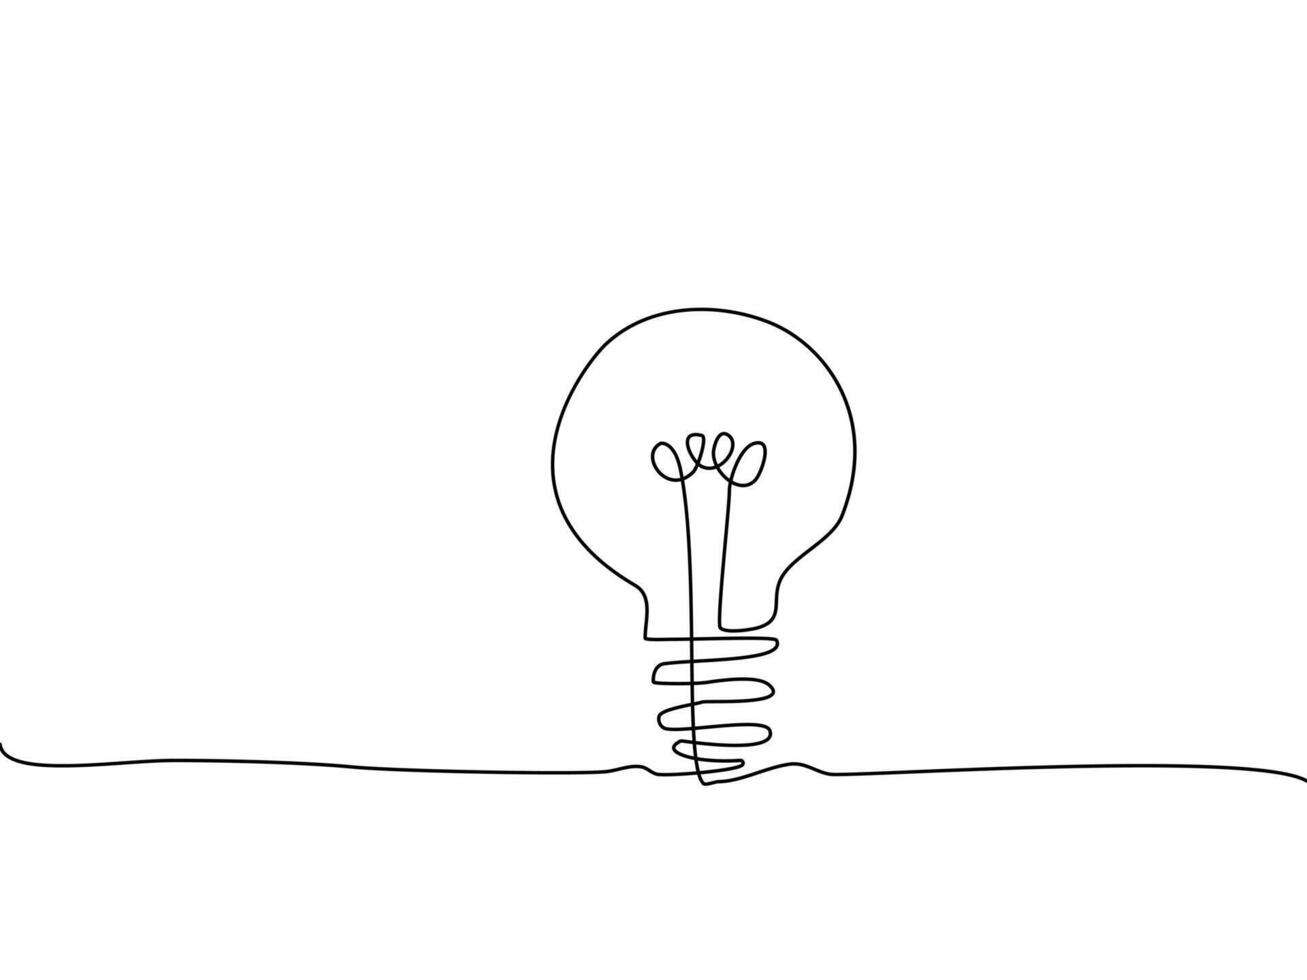 electric bulb that draws a continuous line. Creativity vector